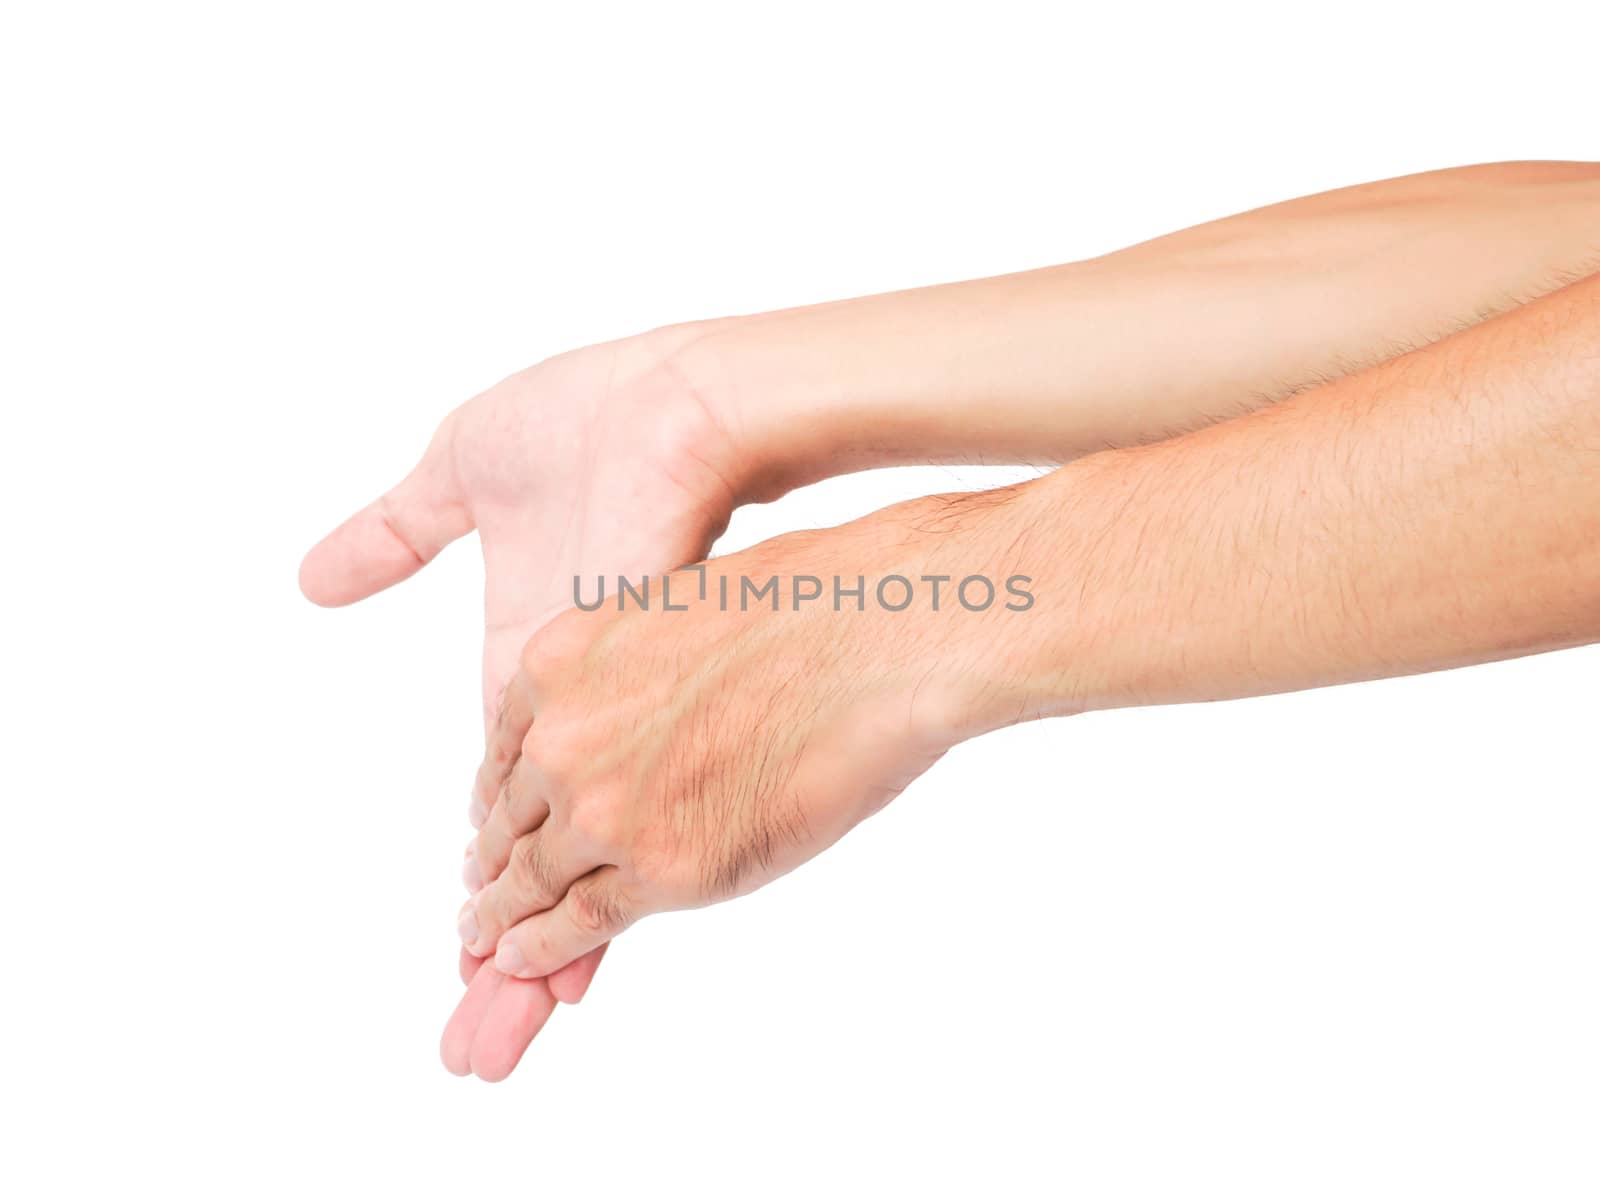 stretching exercises finger ion white background, health care concept